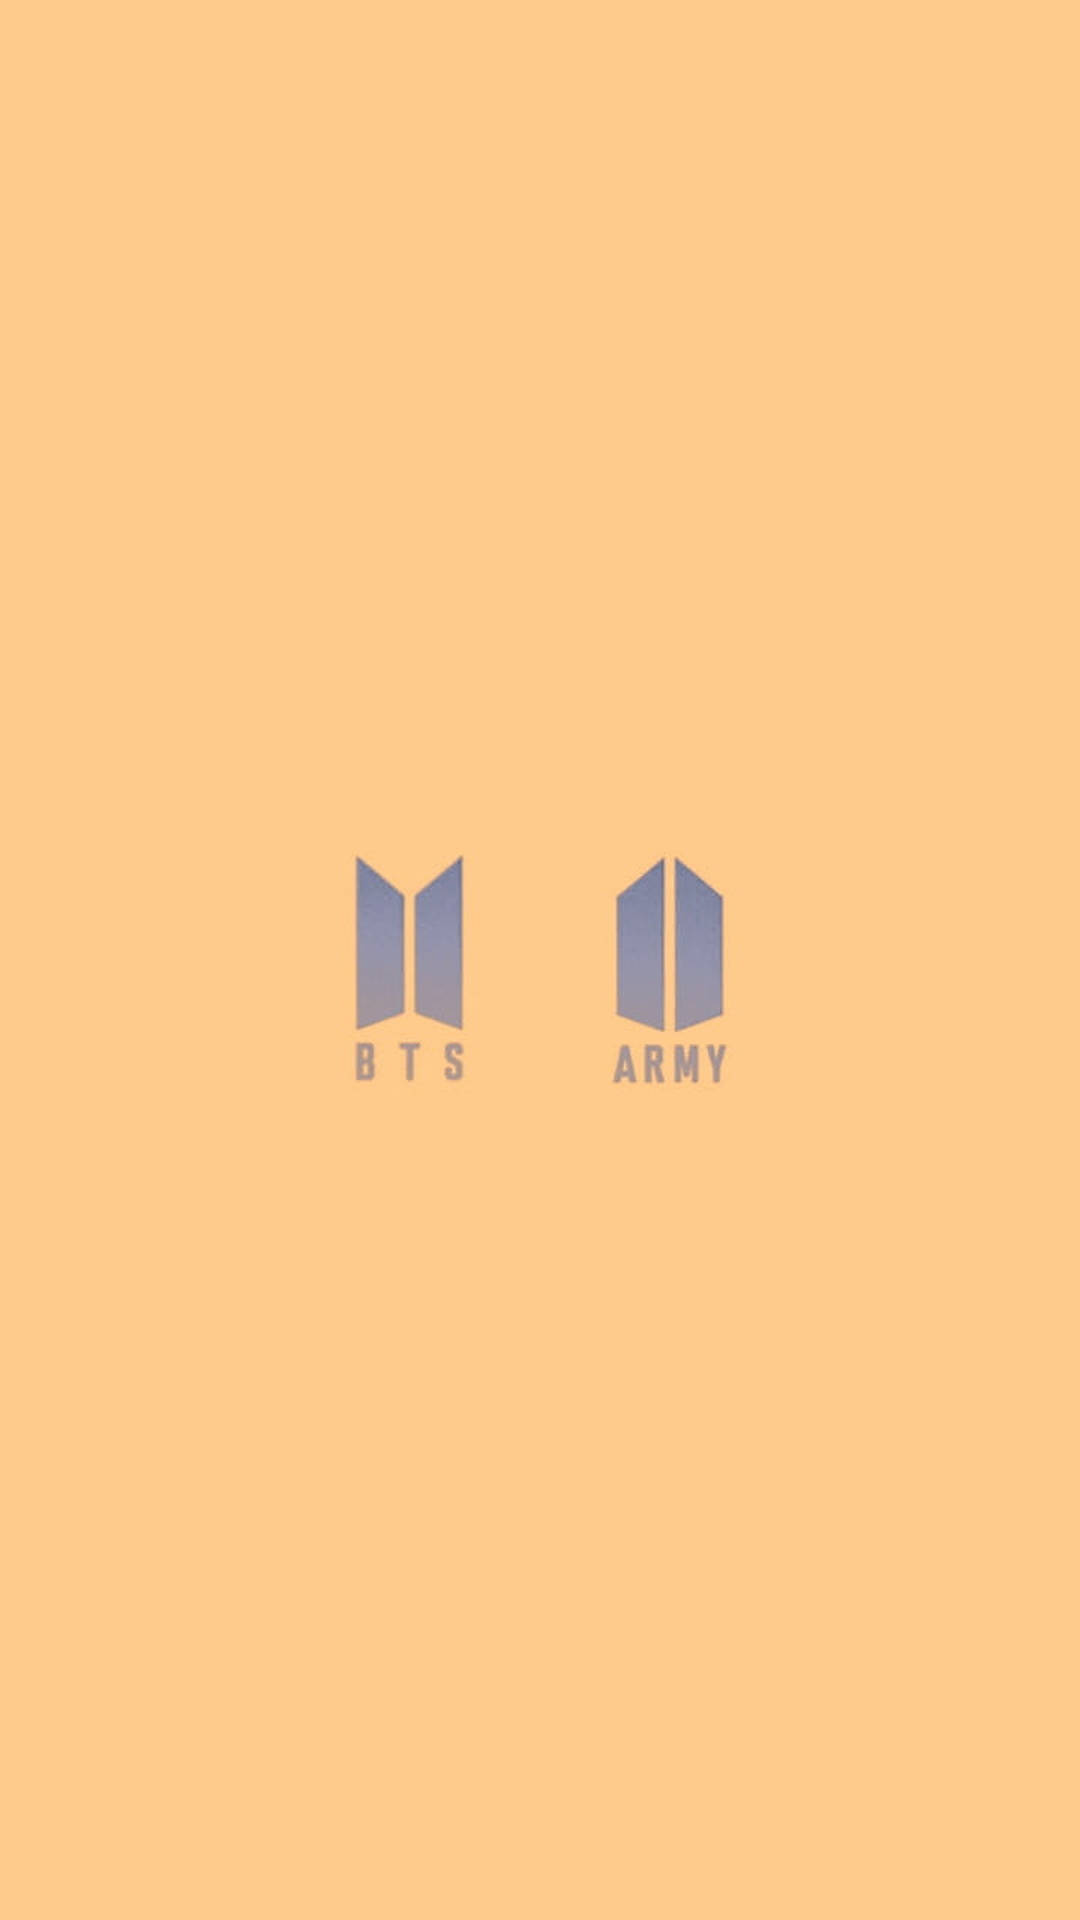 Bts Army Yellow Poster Background